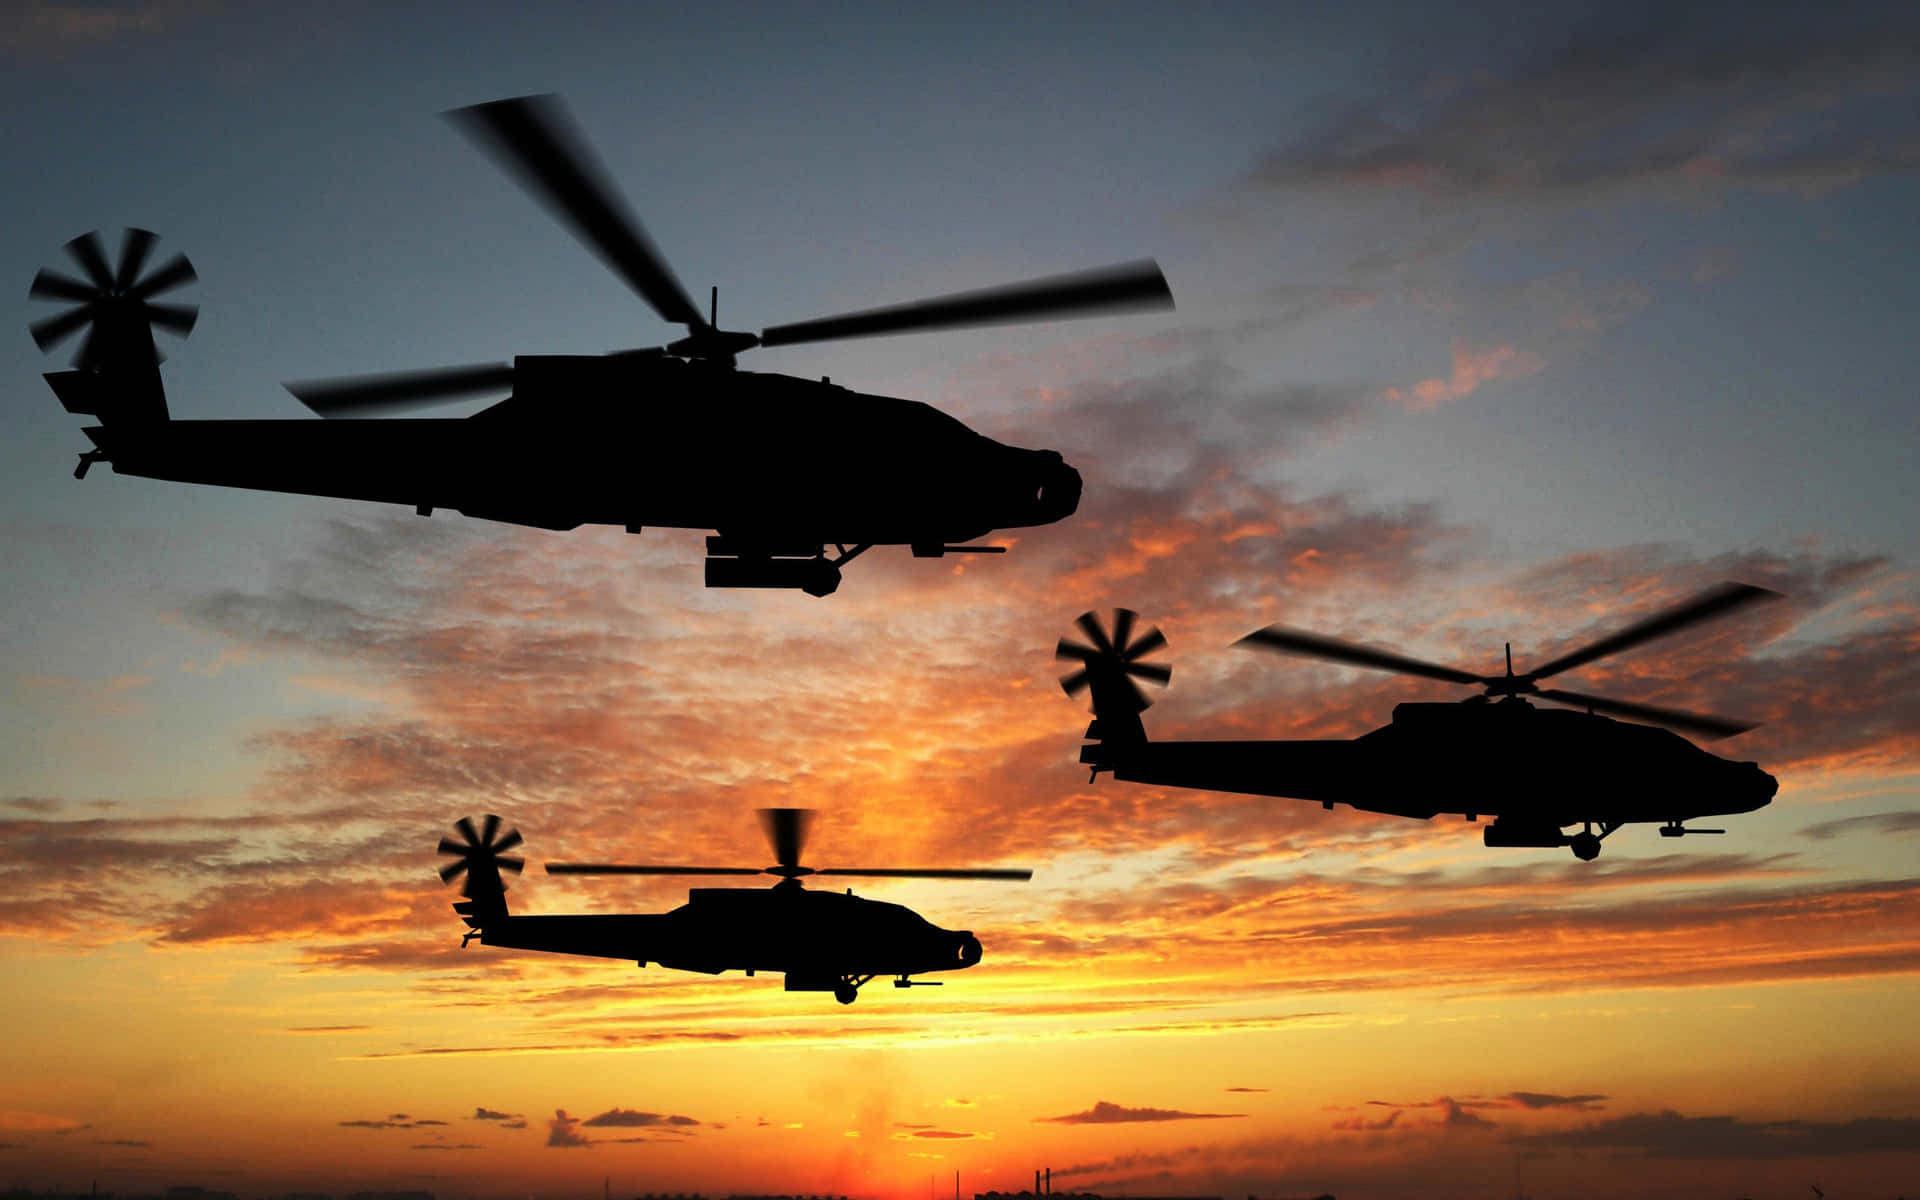 Three Boeing Ah-64 Apache Cool Helicopters